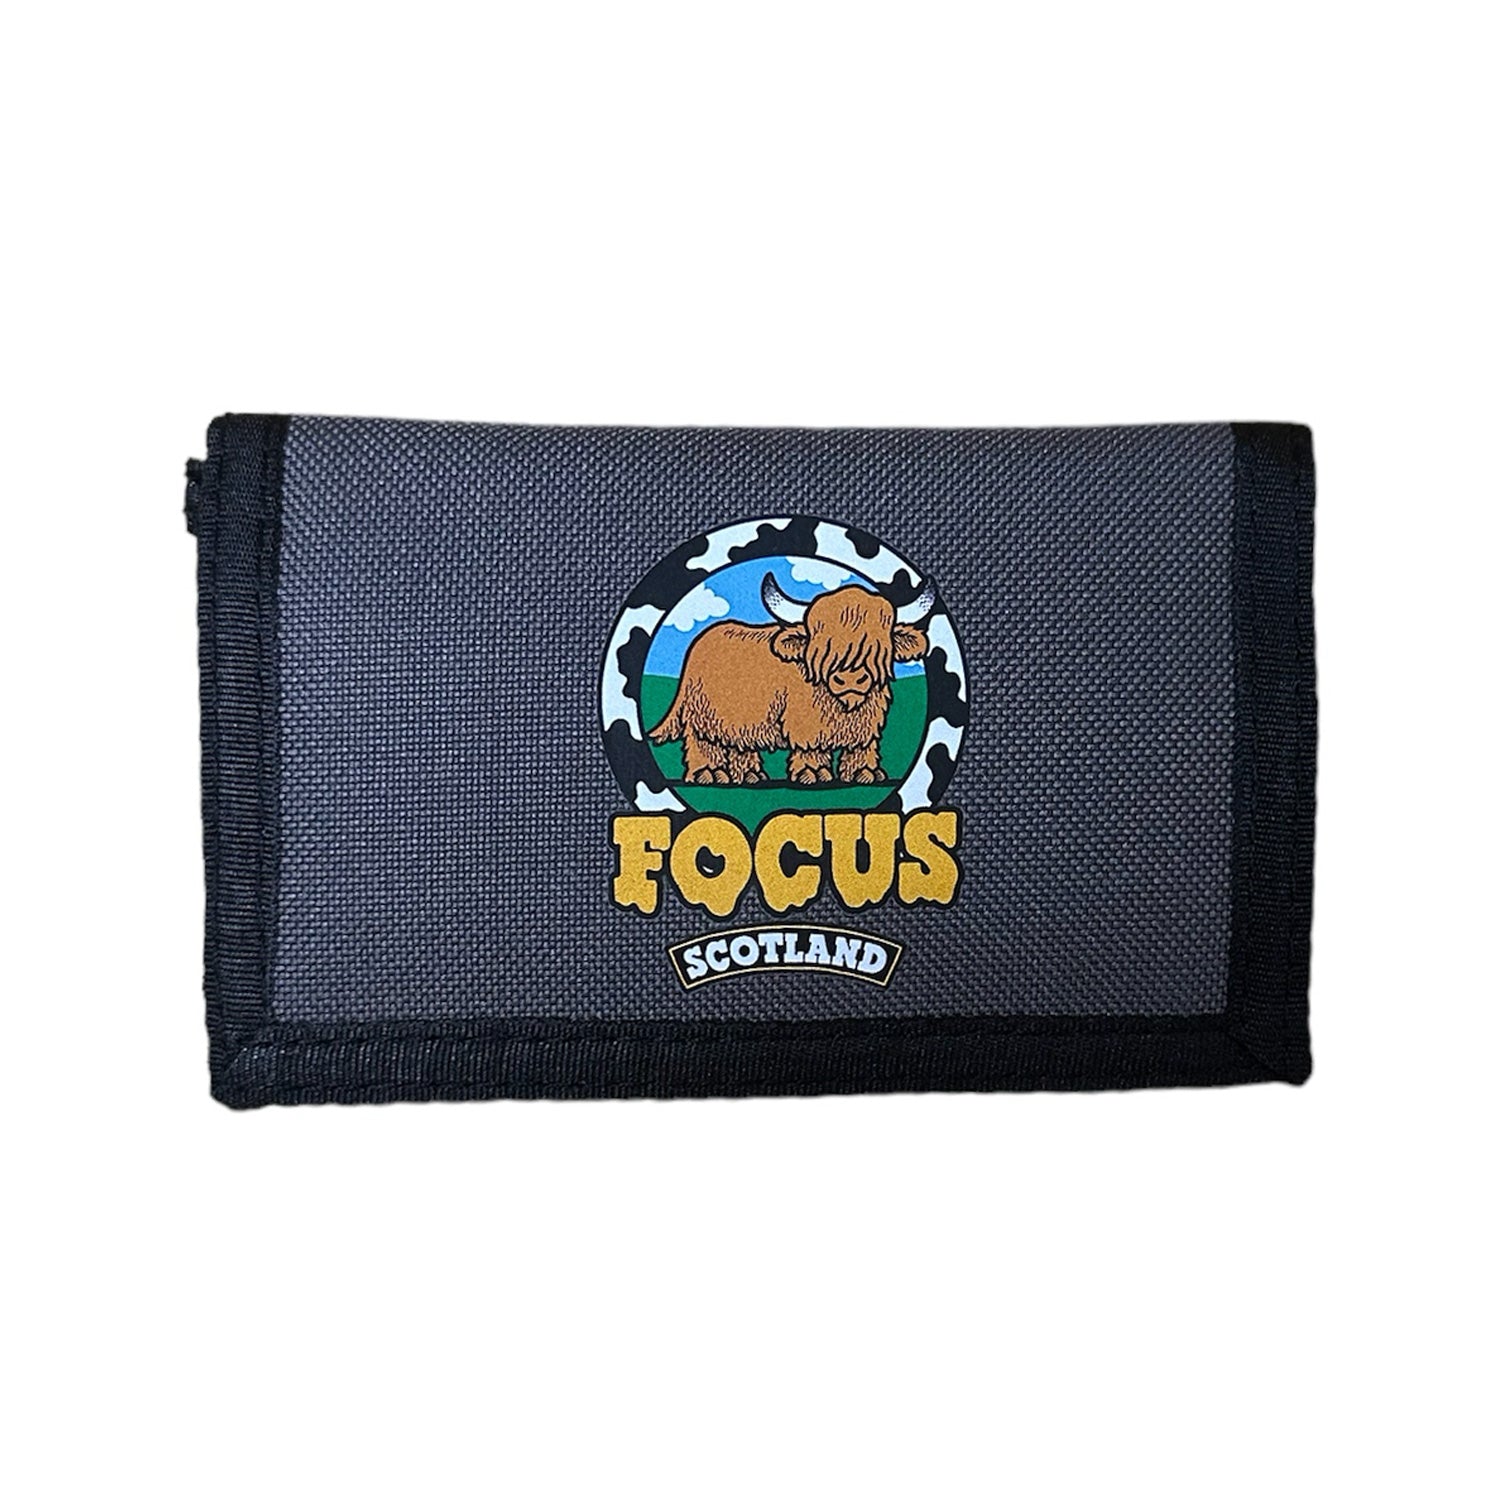 Grey focus wallet with yellow focus melted coo logo on front. Free uk shipping over £50